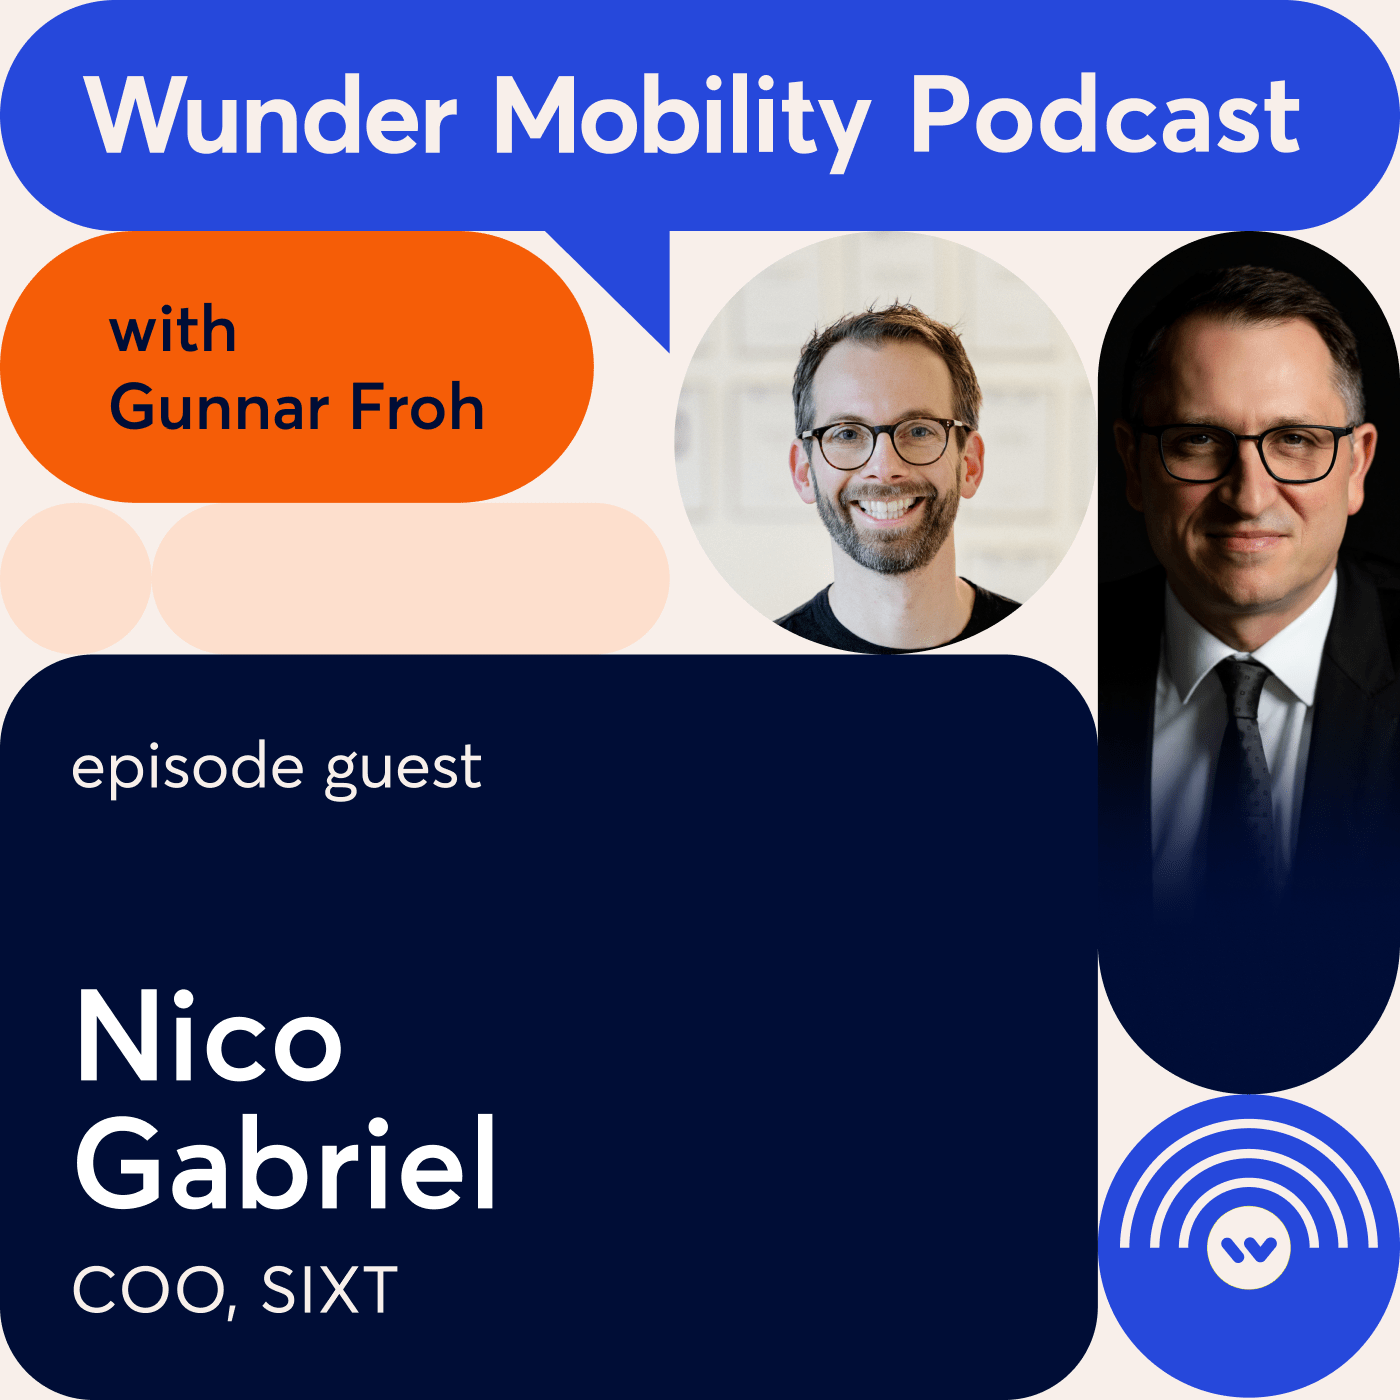 Podcast episode with Nico Gabriel, COO at SIXT , displayed together with Gunnar Froh in fun colorful design elements.